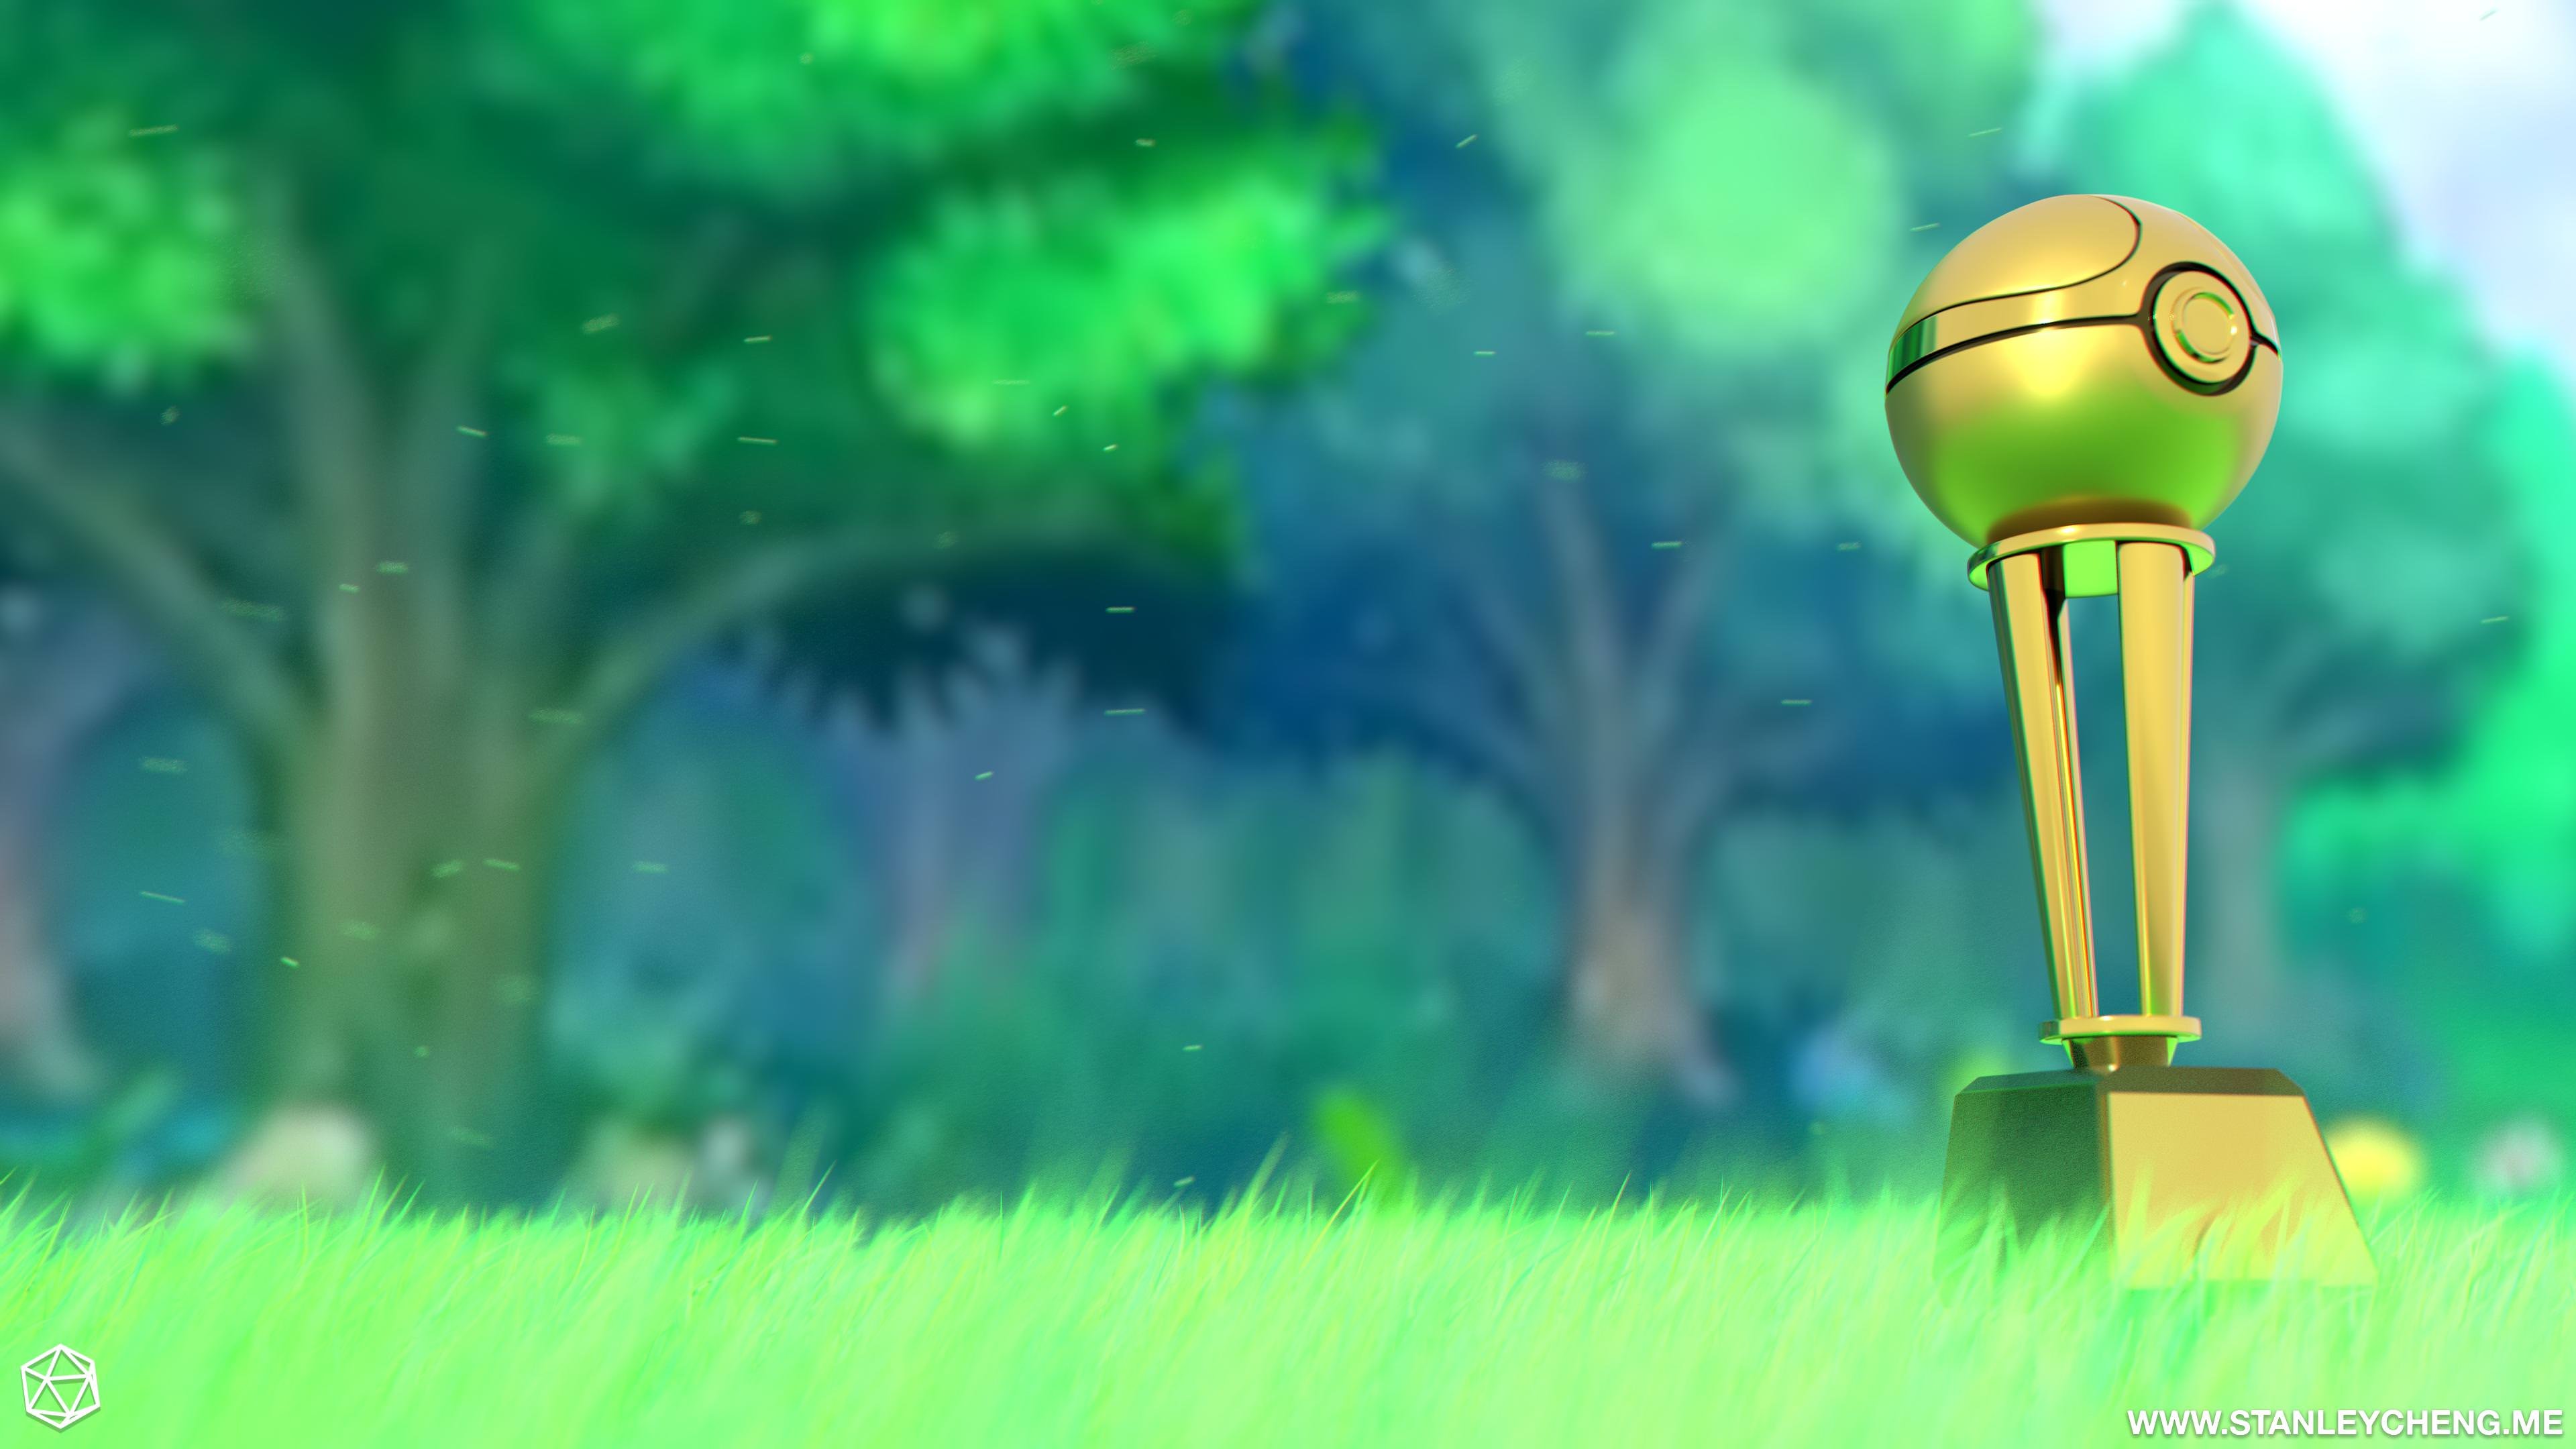 Created a 3D Render of a Pokemon Trophy in the Grass 4K wallpaper